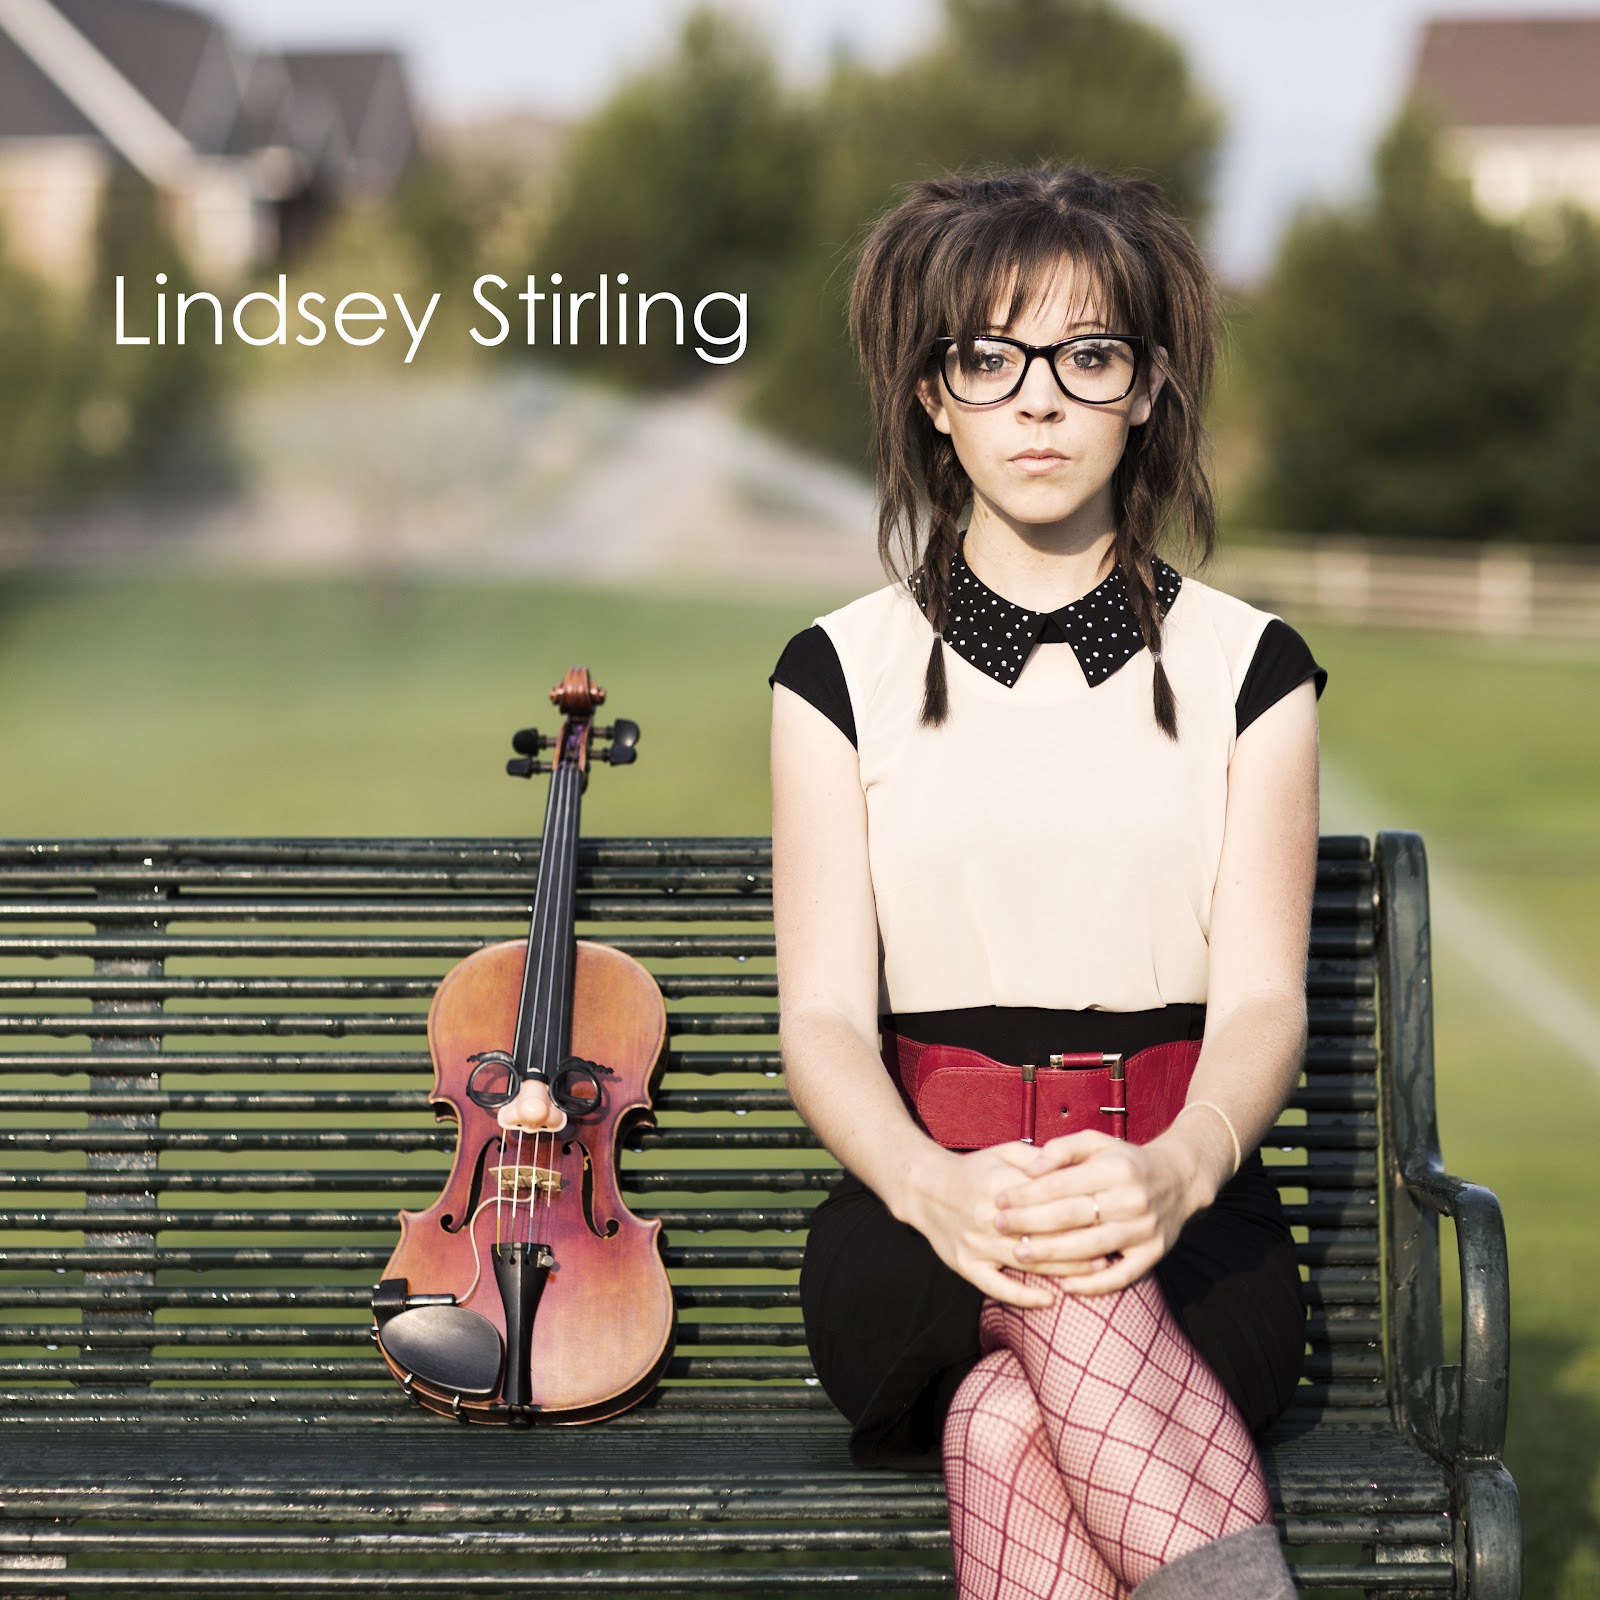 Art for Shadows by Lindsey Stirling